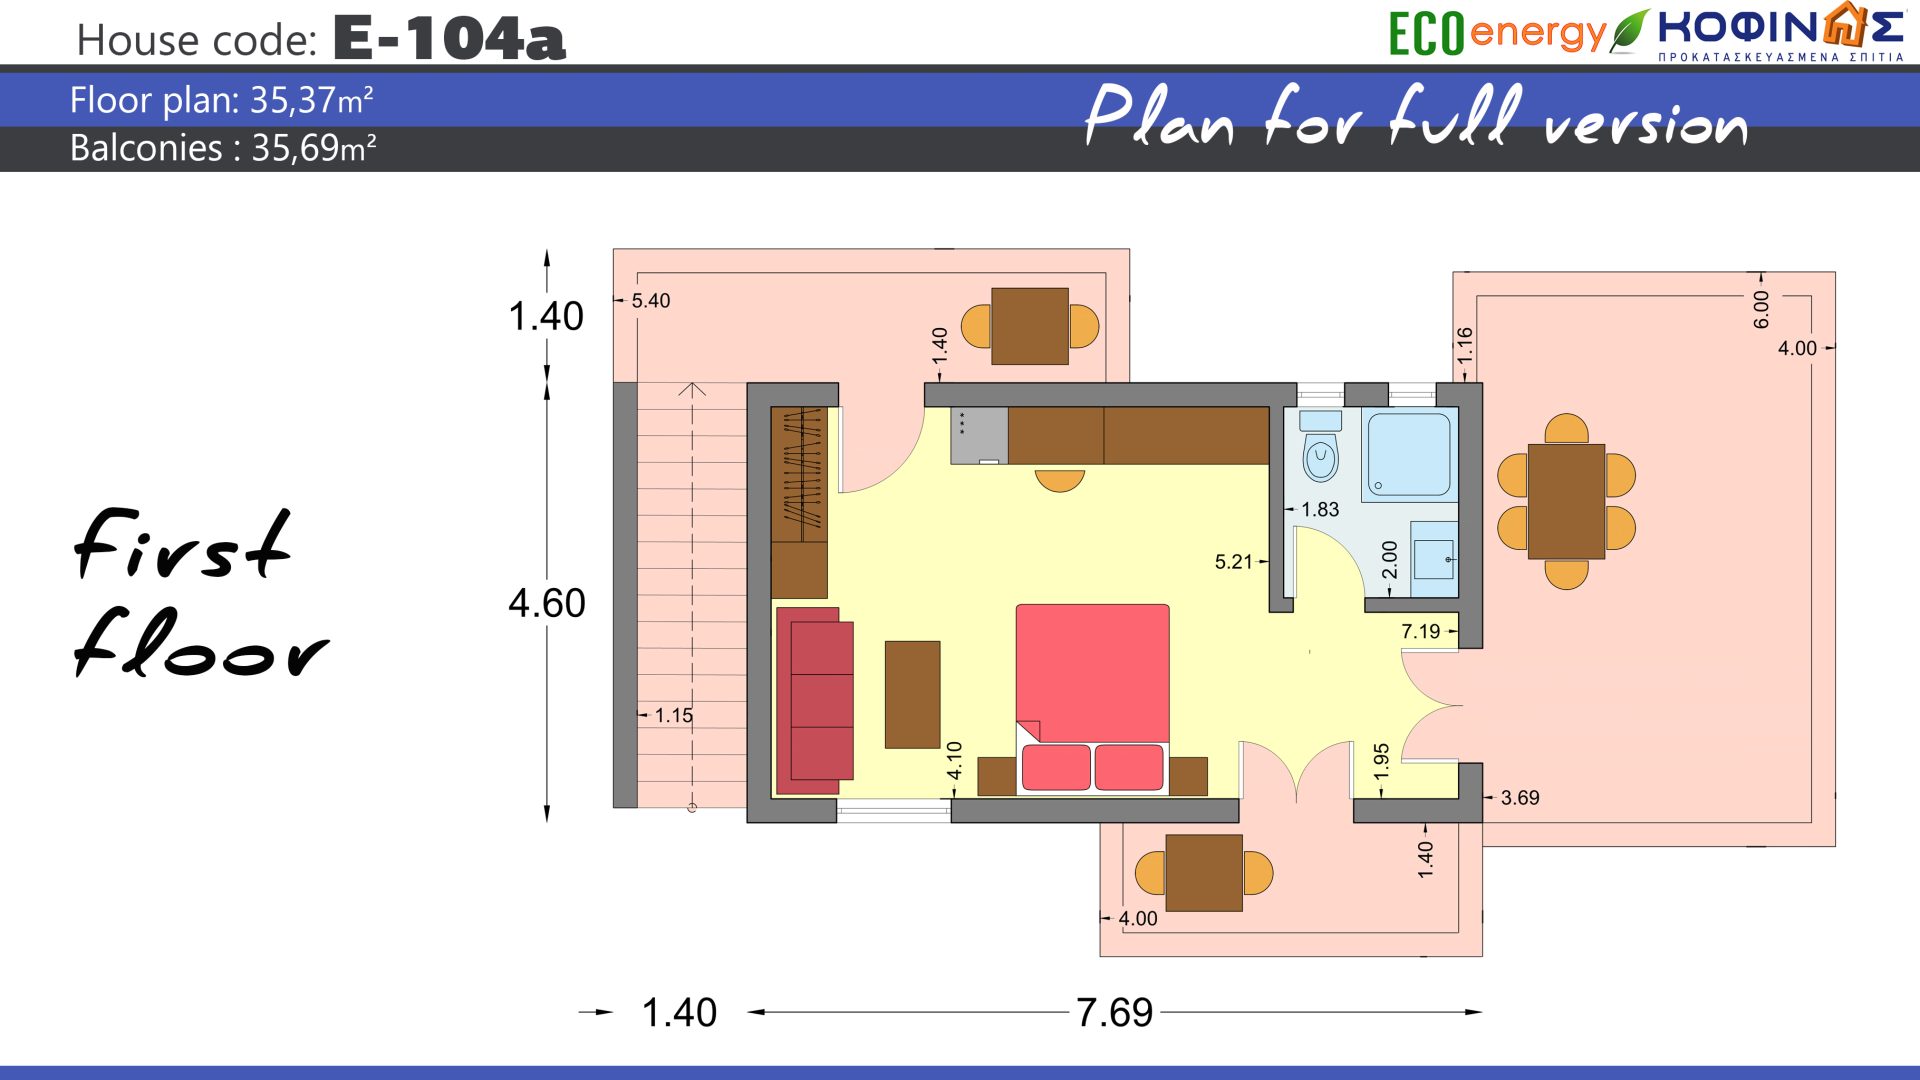 2 Storey Complex E-104a, total surface of 3 x 23,03=69.09 m² +35.37 m² (floor) = 104,46 m², covered areas 4.71 m², balconies 35.69 m²